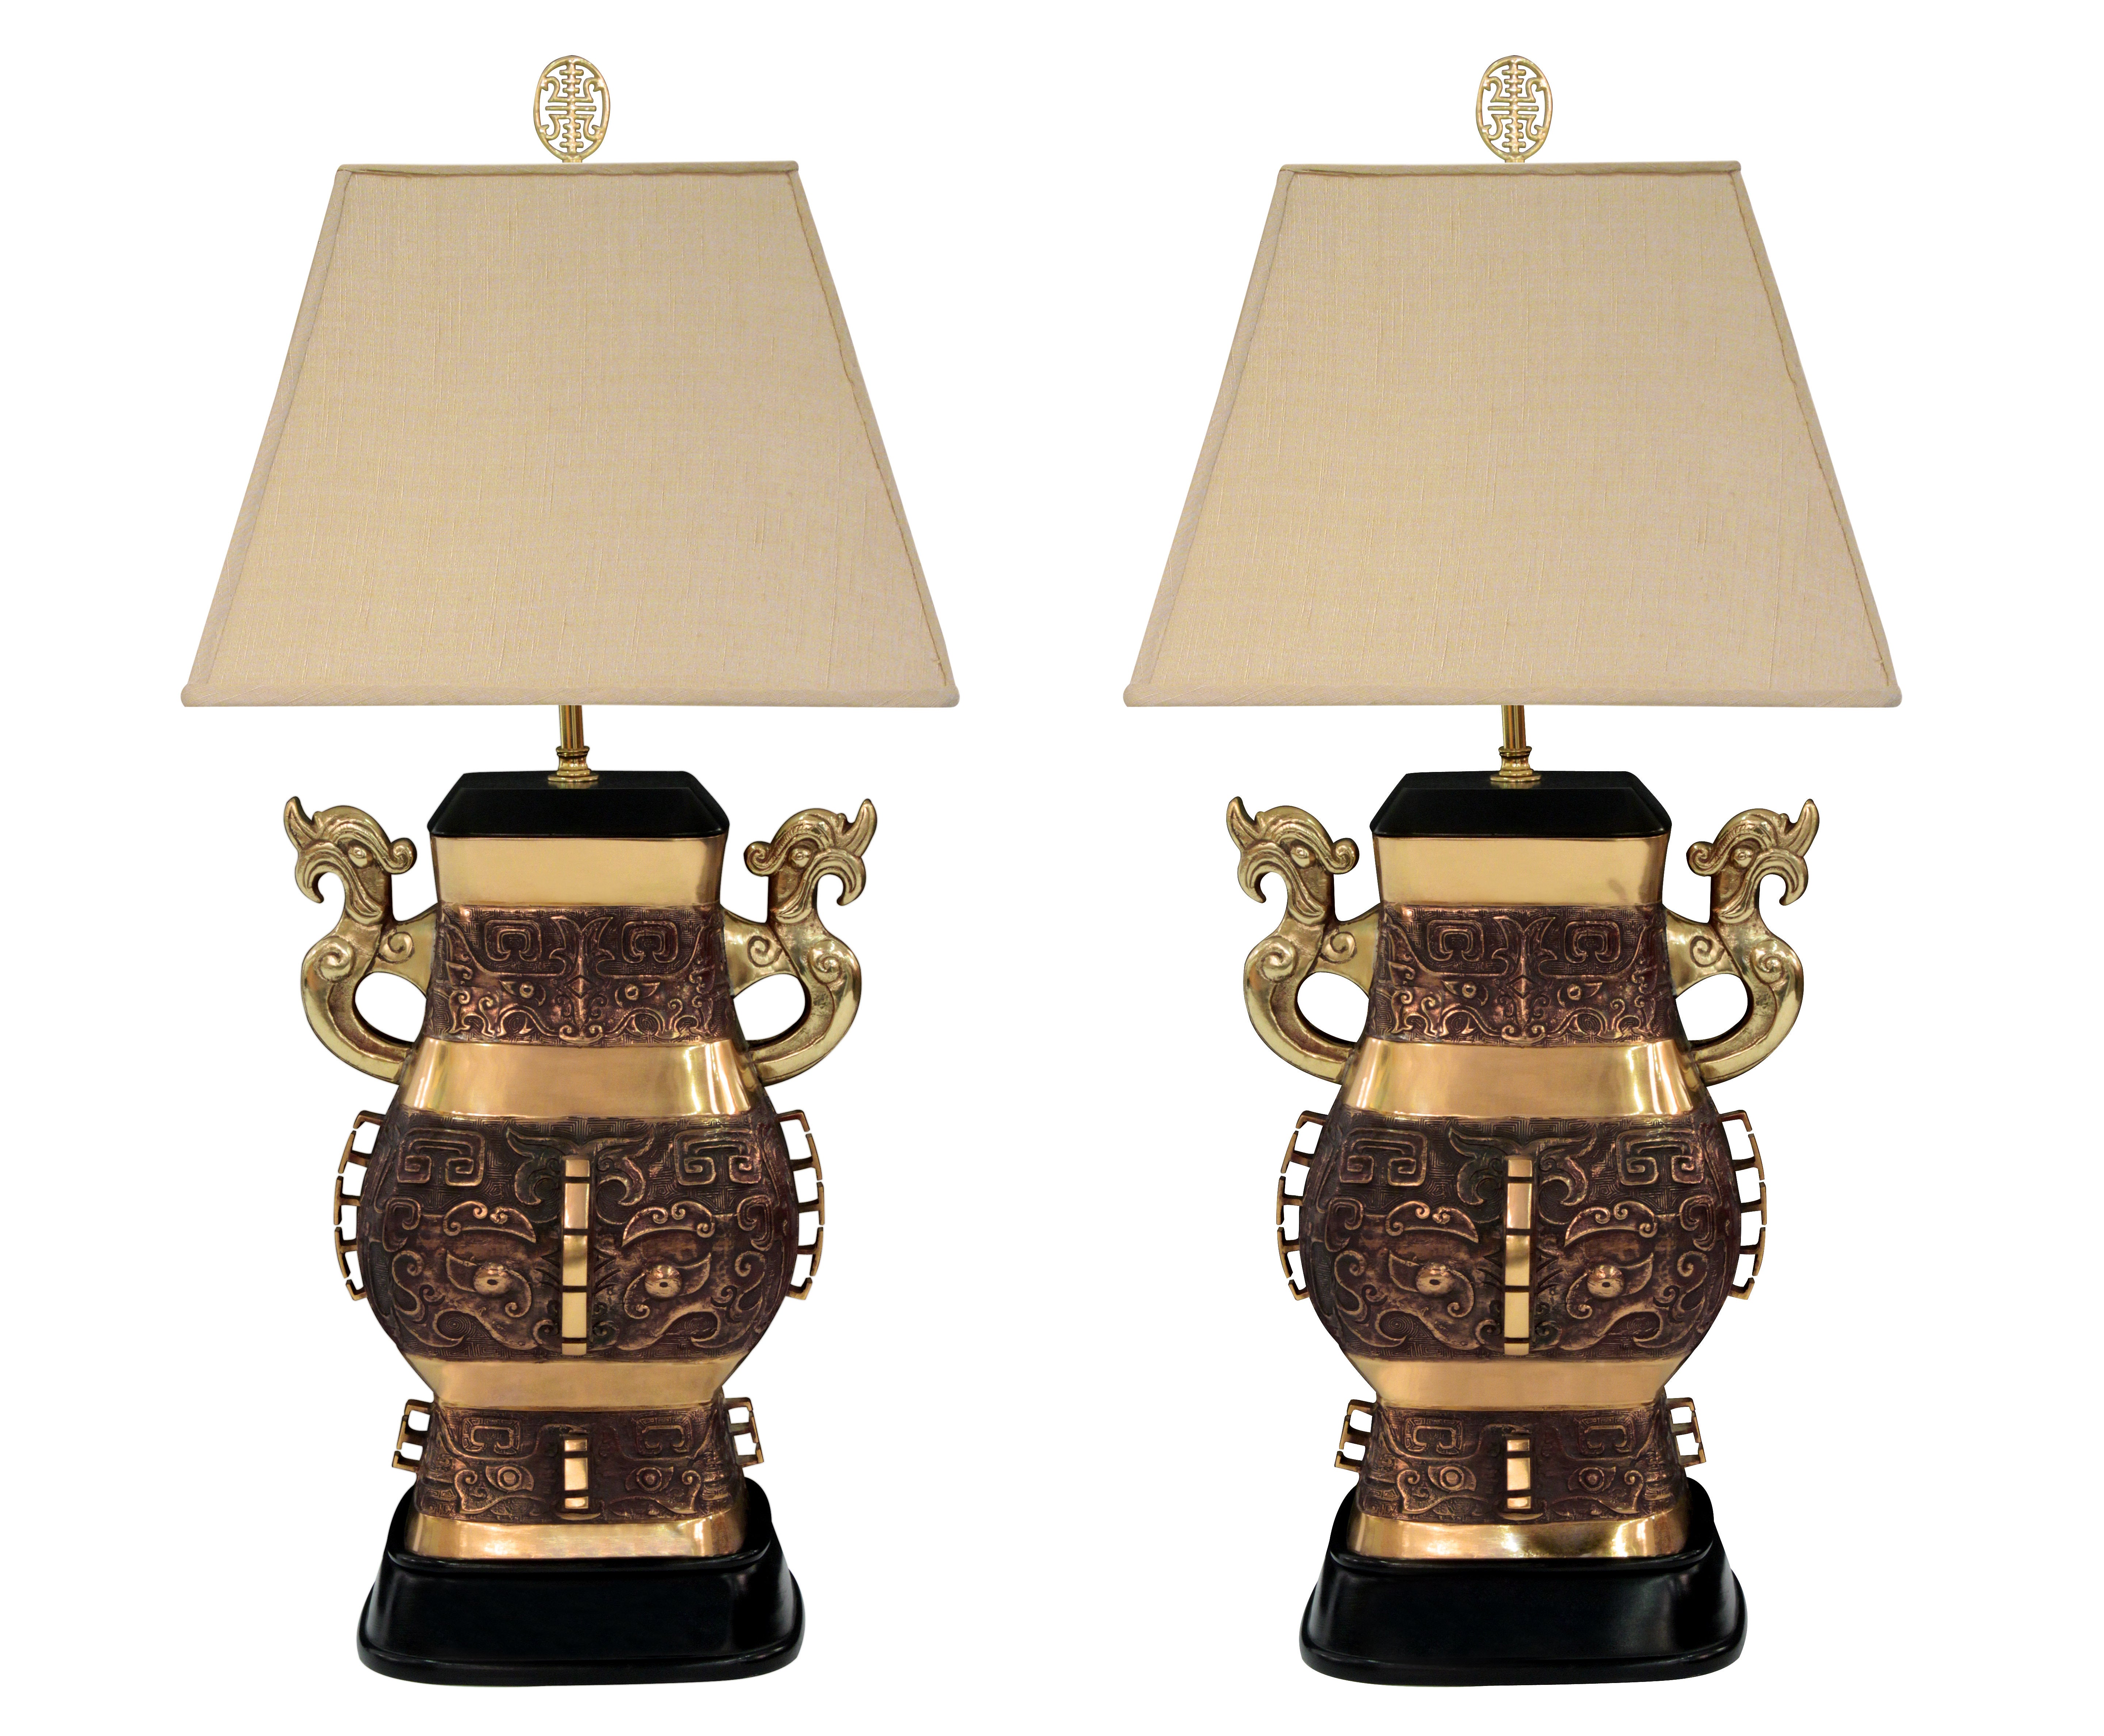 Pair of Impressive Bronze Chinese Urn Table Lamps